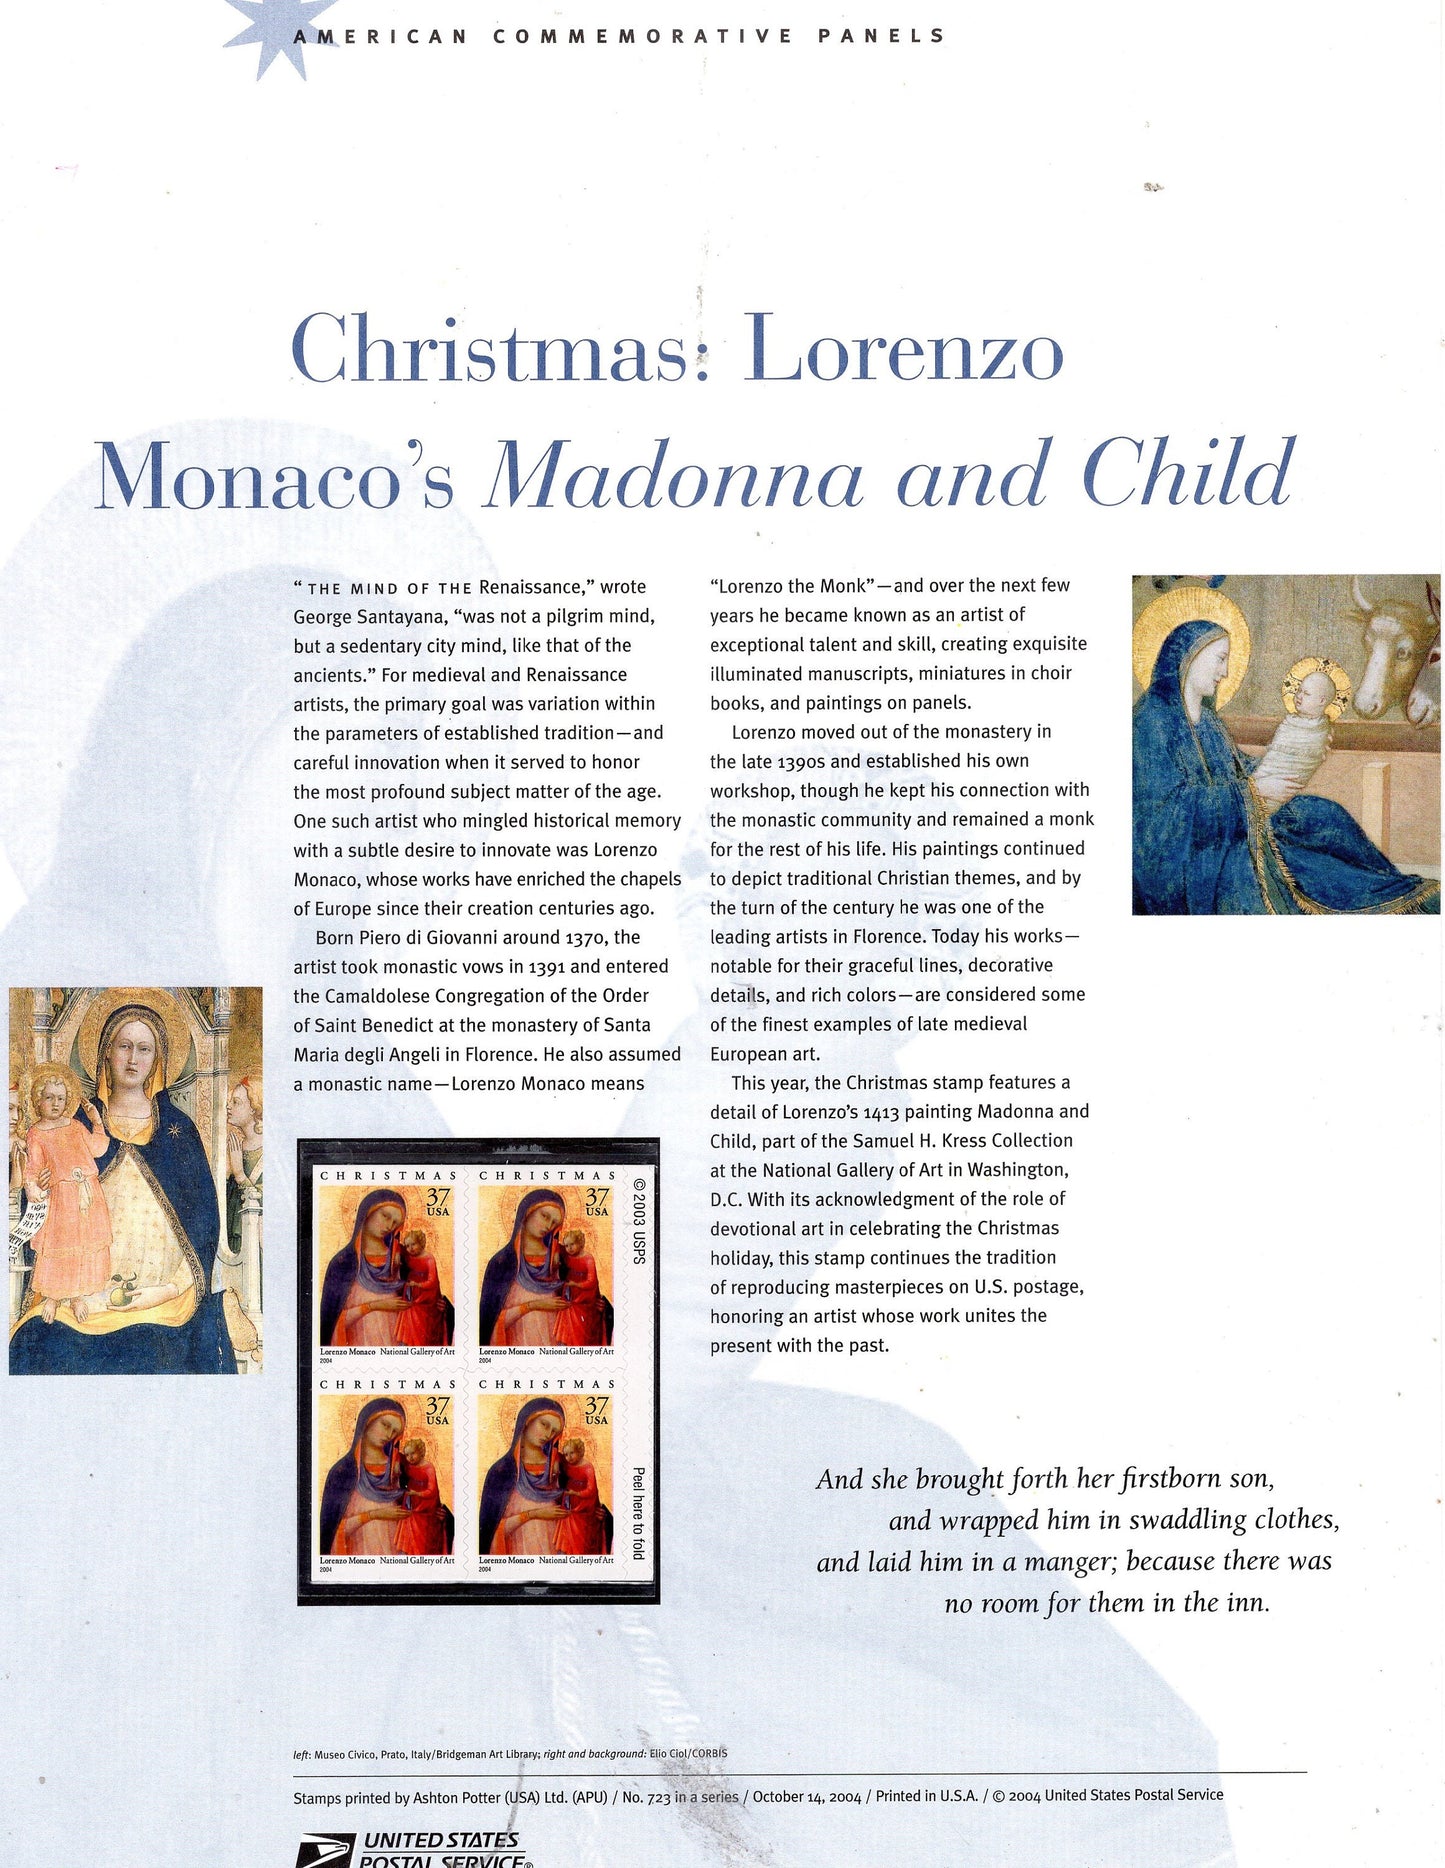 MADONNA CHILD CHRISTMAS Lorenzo Monaco Commemorative Panel with Block of 4 Stamps Illustrations plus Text – A Great Gift 8.5x11 -2004 -